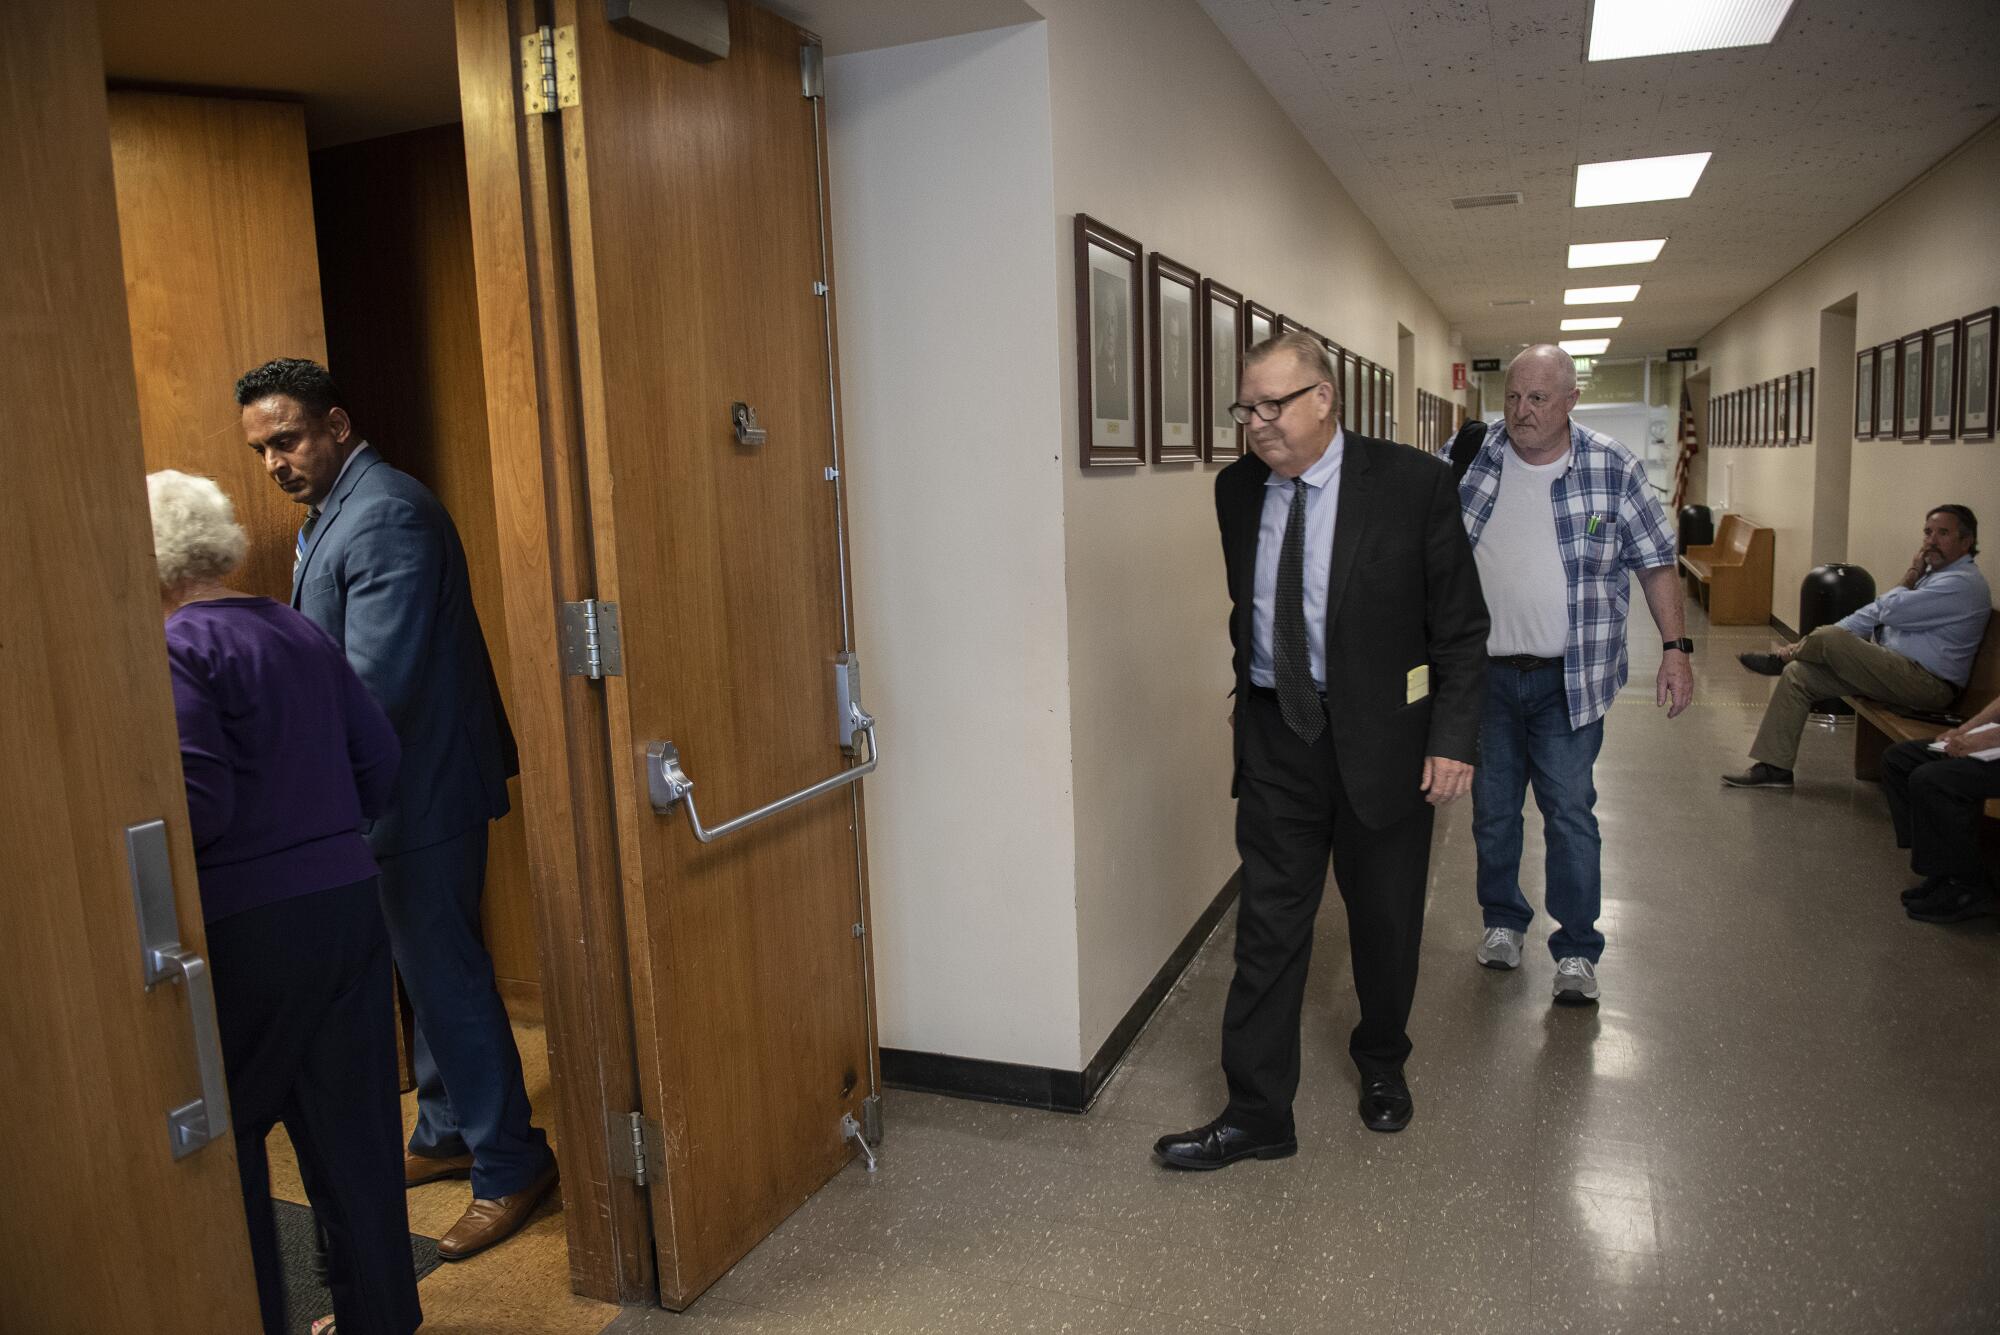 Modesto attorney Frank Carson heads into the courtroom at the Stanislaus County Courthouse.